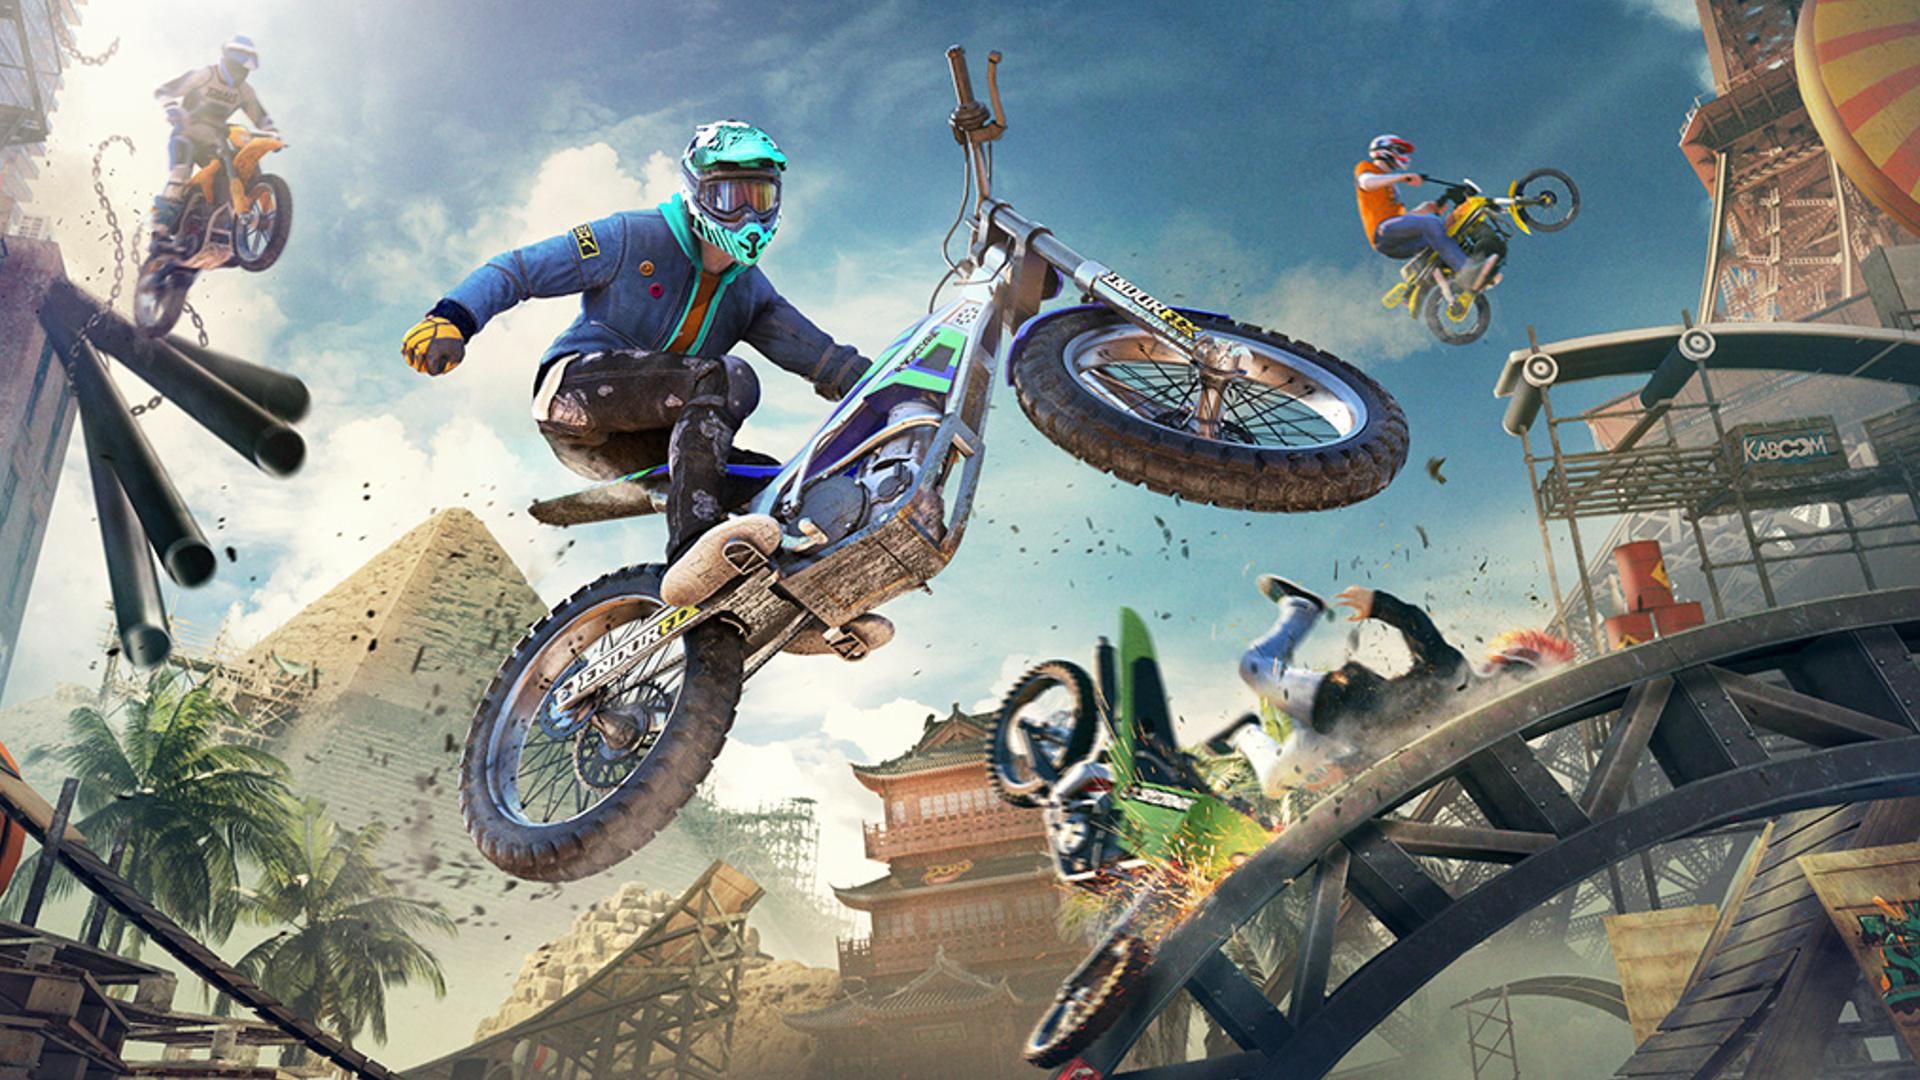 Best Switch racing games: A biker pulls a stunt as they jump a canyon in Trials Rising